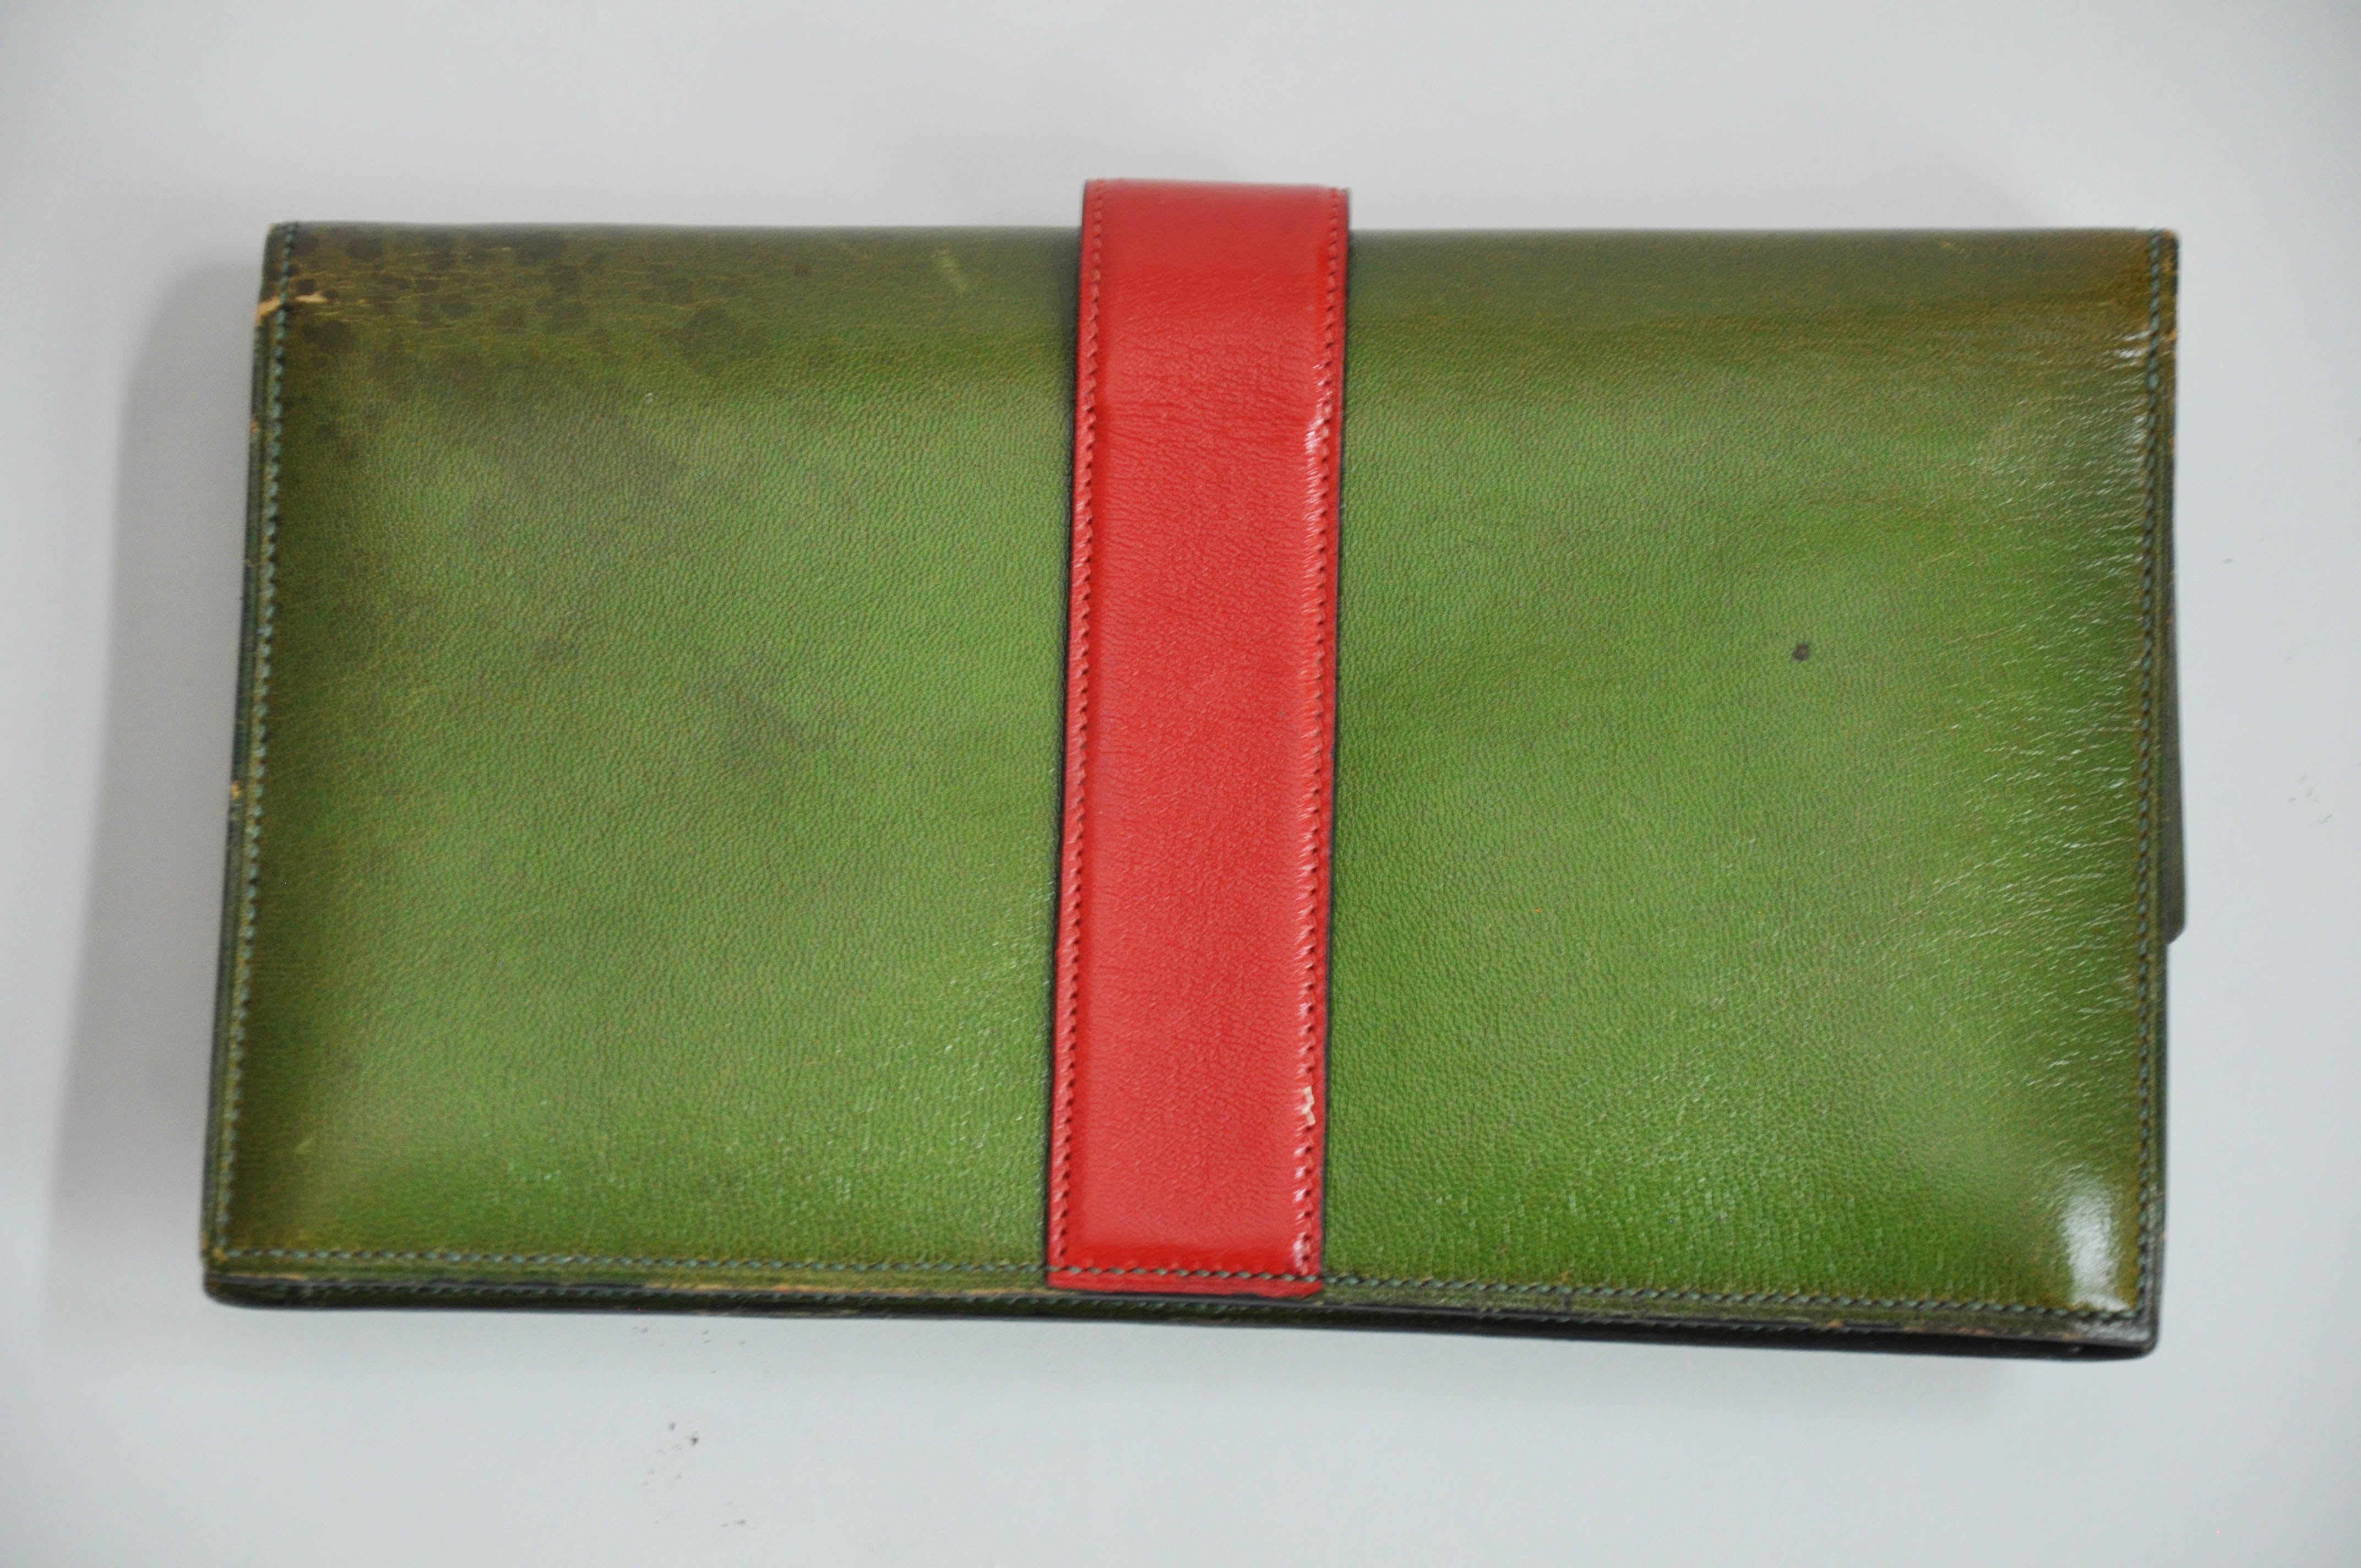 A rare vintage Hermès Medor clutch purse, in unique apple green leather with red leather clasp and brass studs.